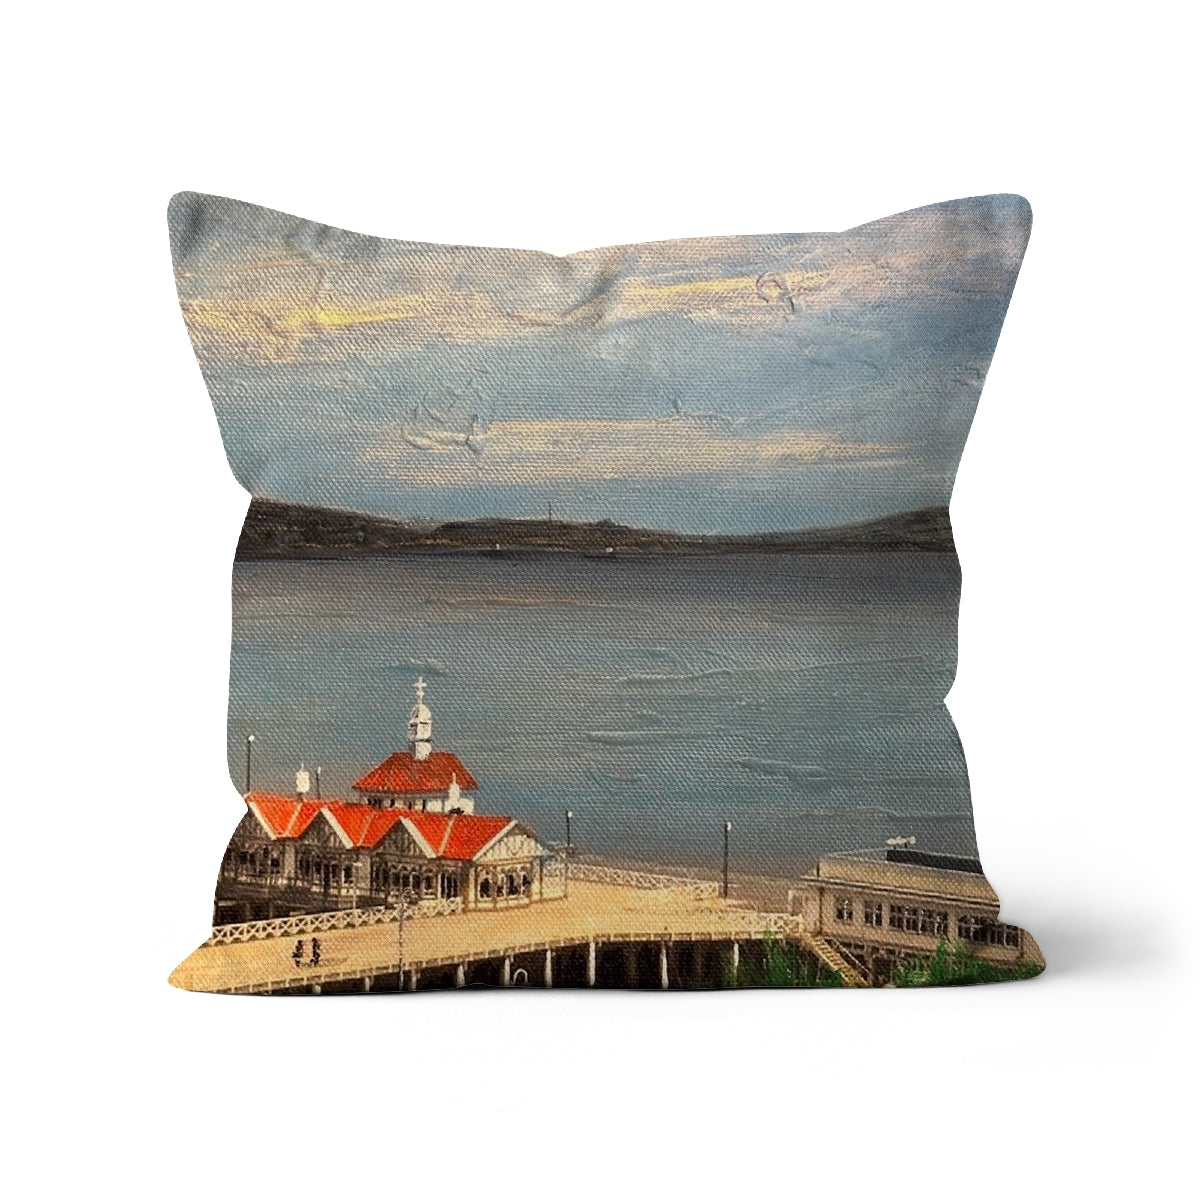 Looking From Dunoon Art Gifts Cushion-Cushions-River Clyde Art Gallery-Canvas-22"x22"-Paintings, Prints, Homeware, Art Gifts From Scotland By Scottish Artist Kevin Hunter